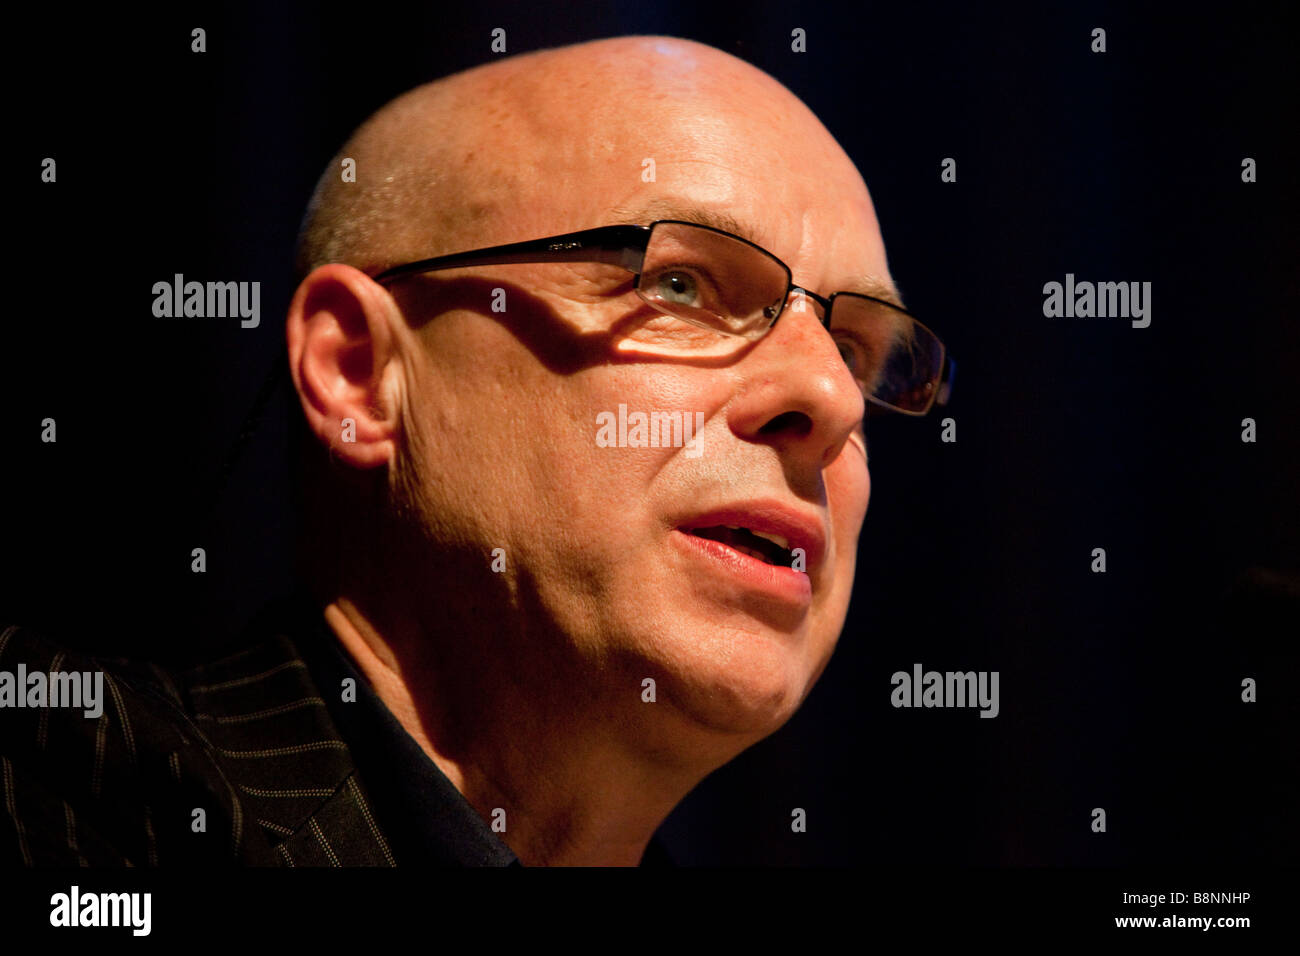 The Convention on Modern Liberty London England 28th February 2009 Brian Eno musician and campaigner speaking Stock Photo